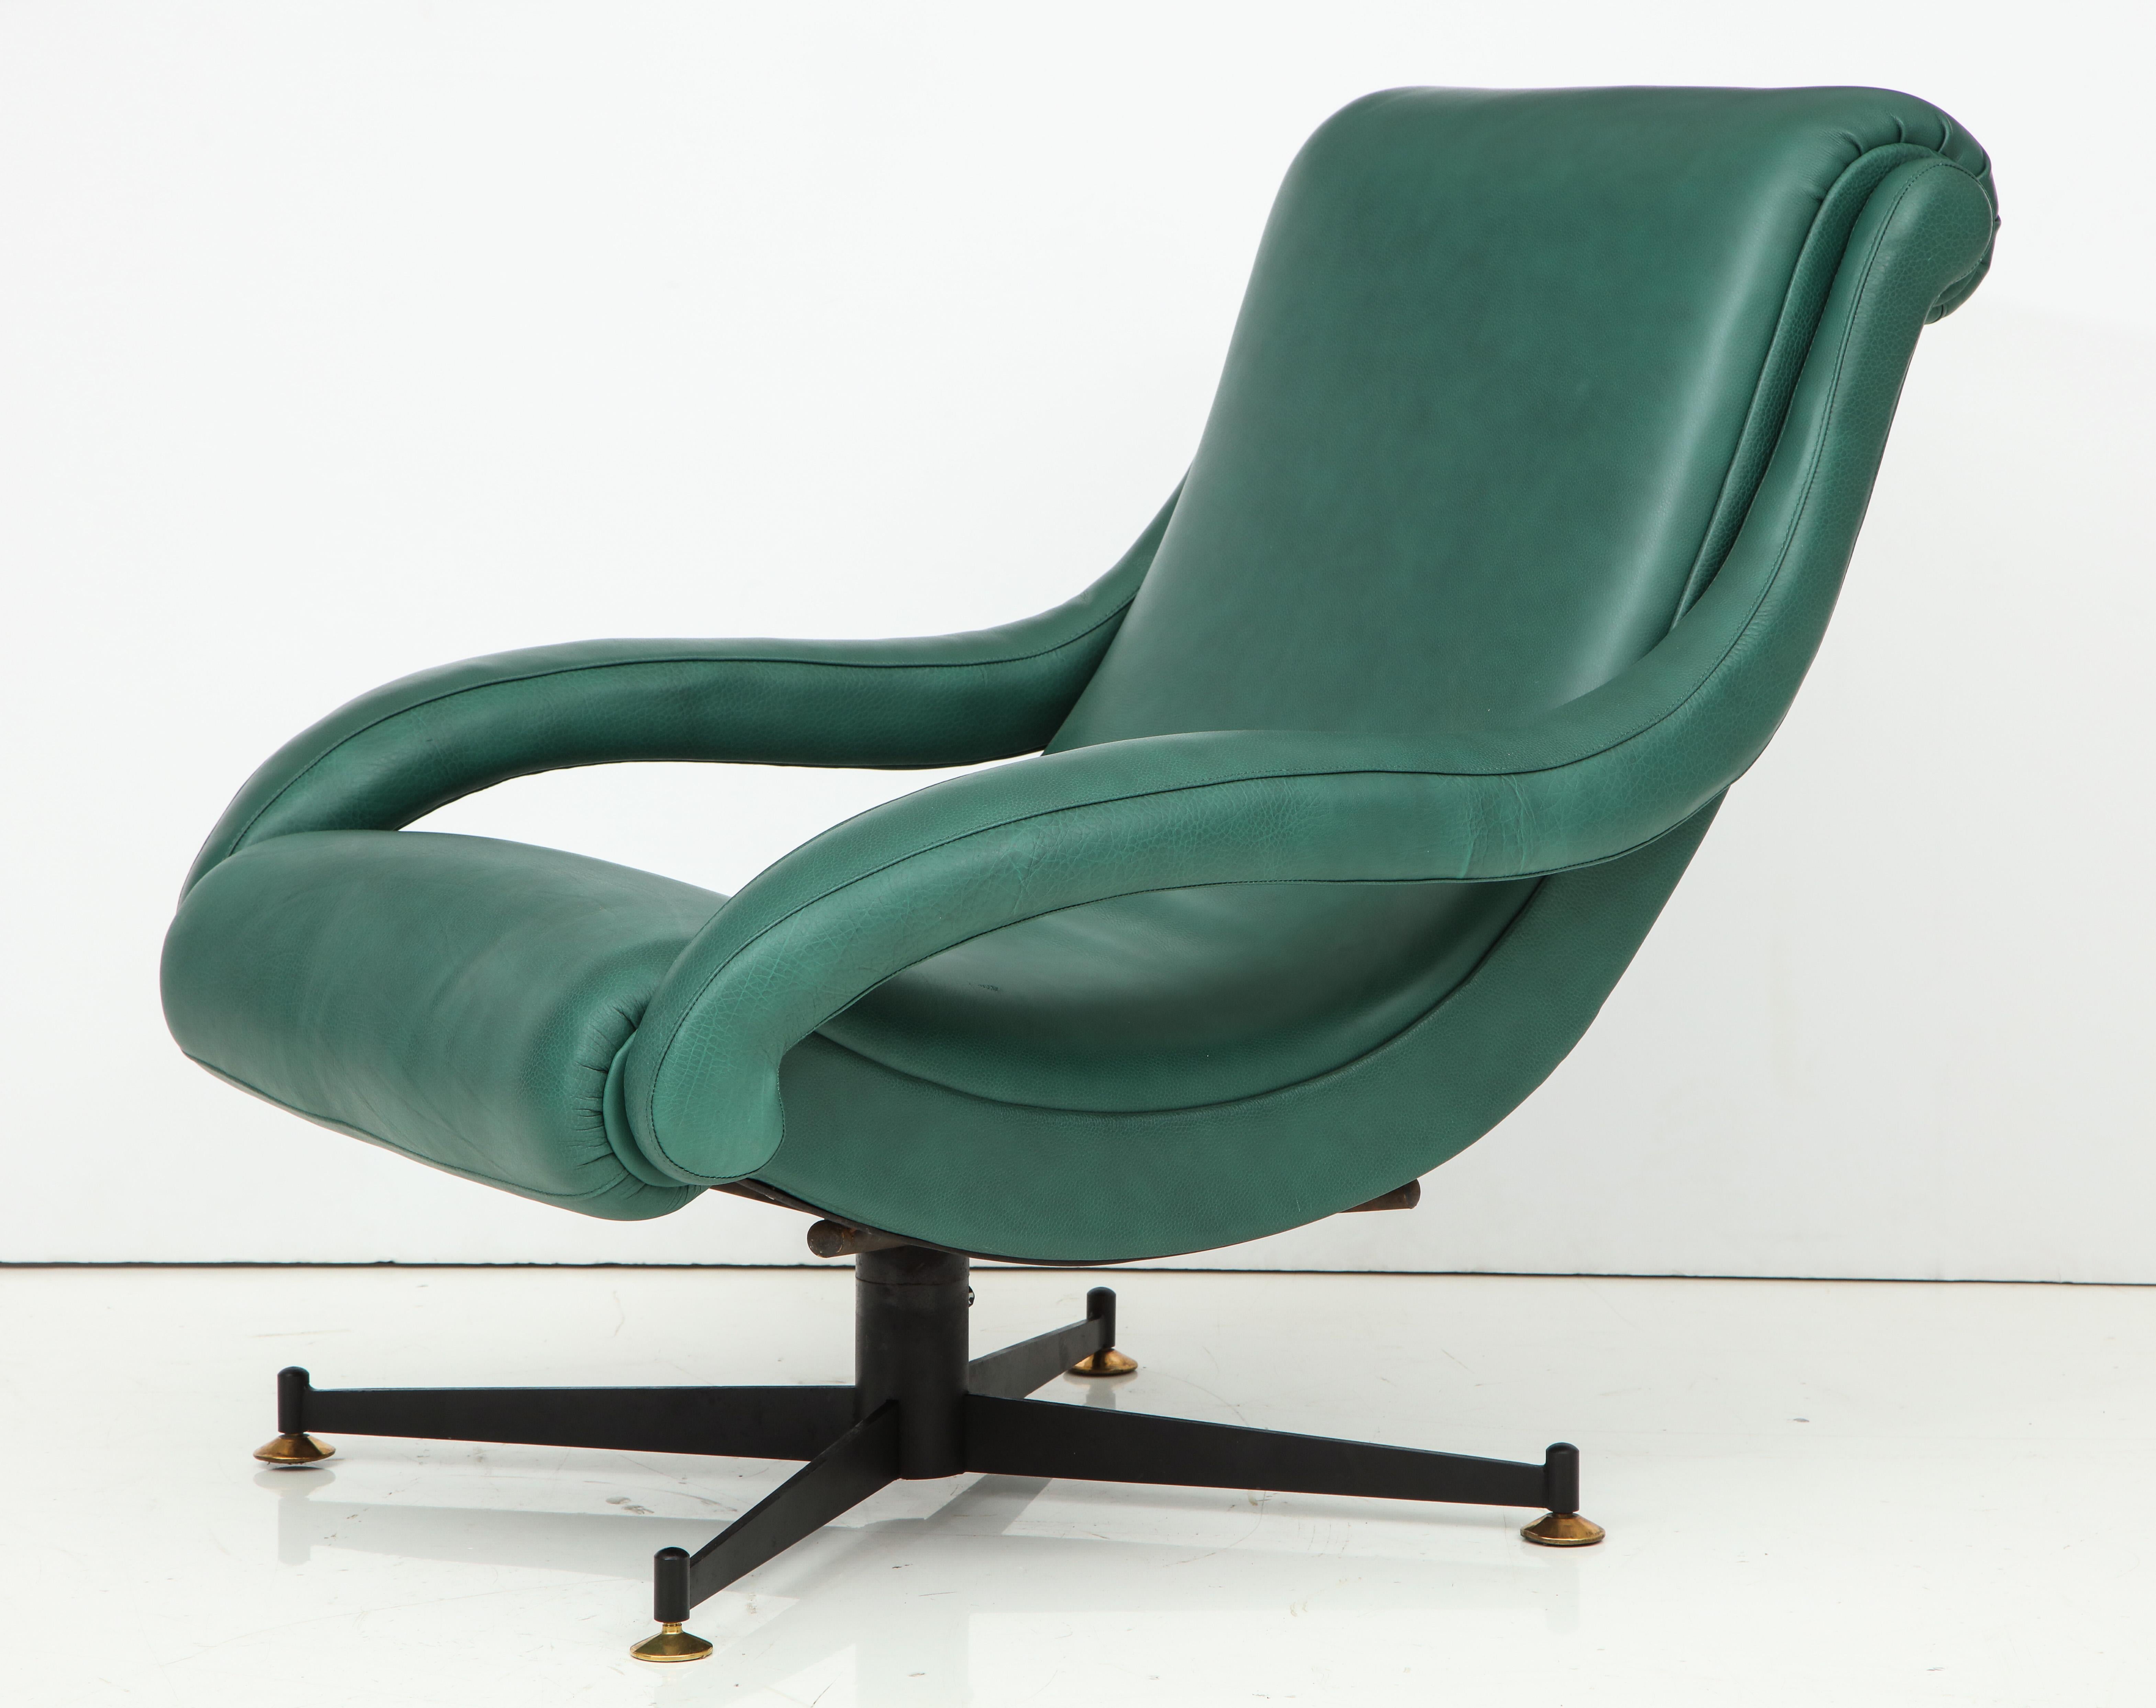 Italian Pair of Lounge Chairs in Gucci Green Leather by Radice for Lenzi, c. 1950, Italy